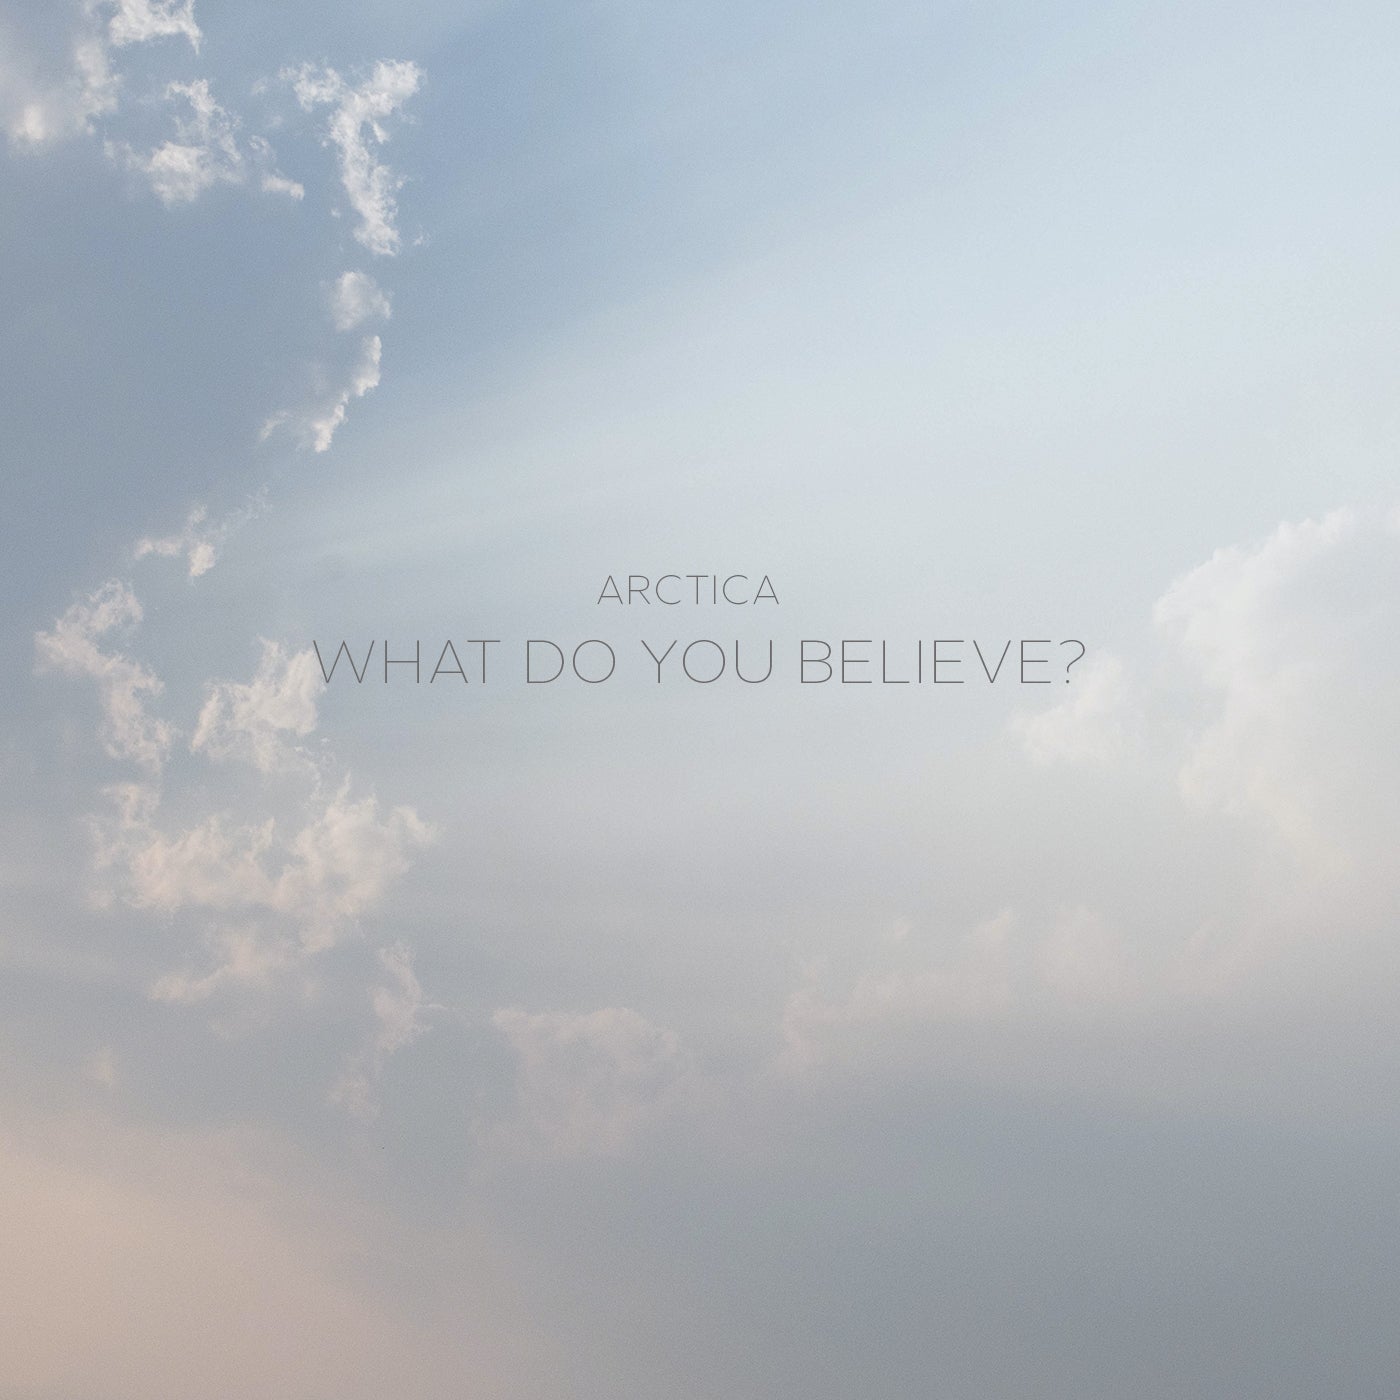 What Do You Believe?